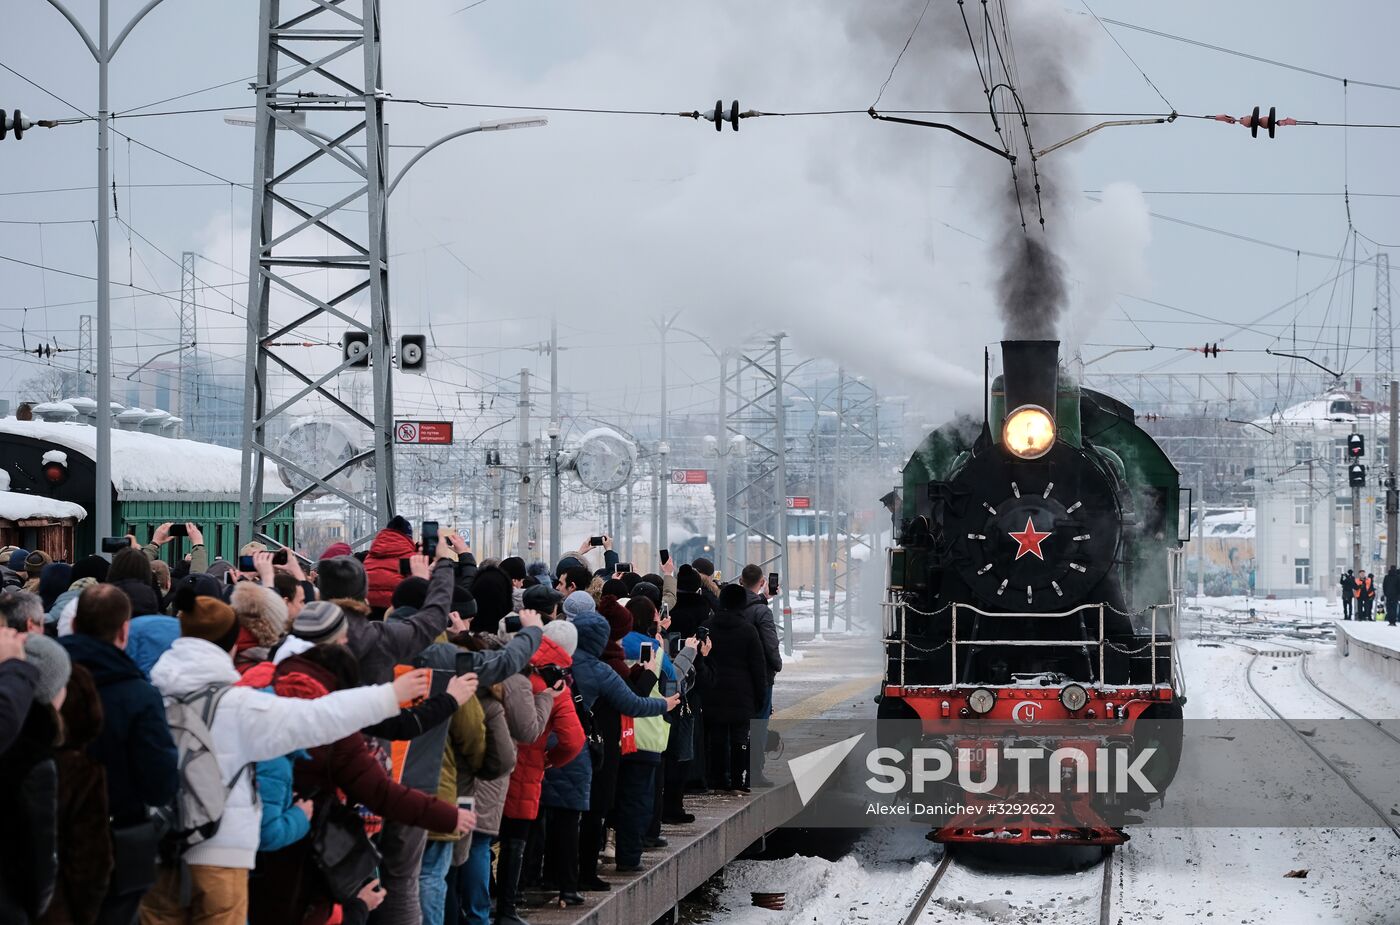 75th anniversary of arrival of first train in Leningrad after breaking blockade